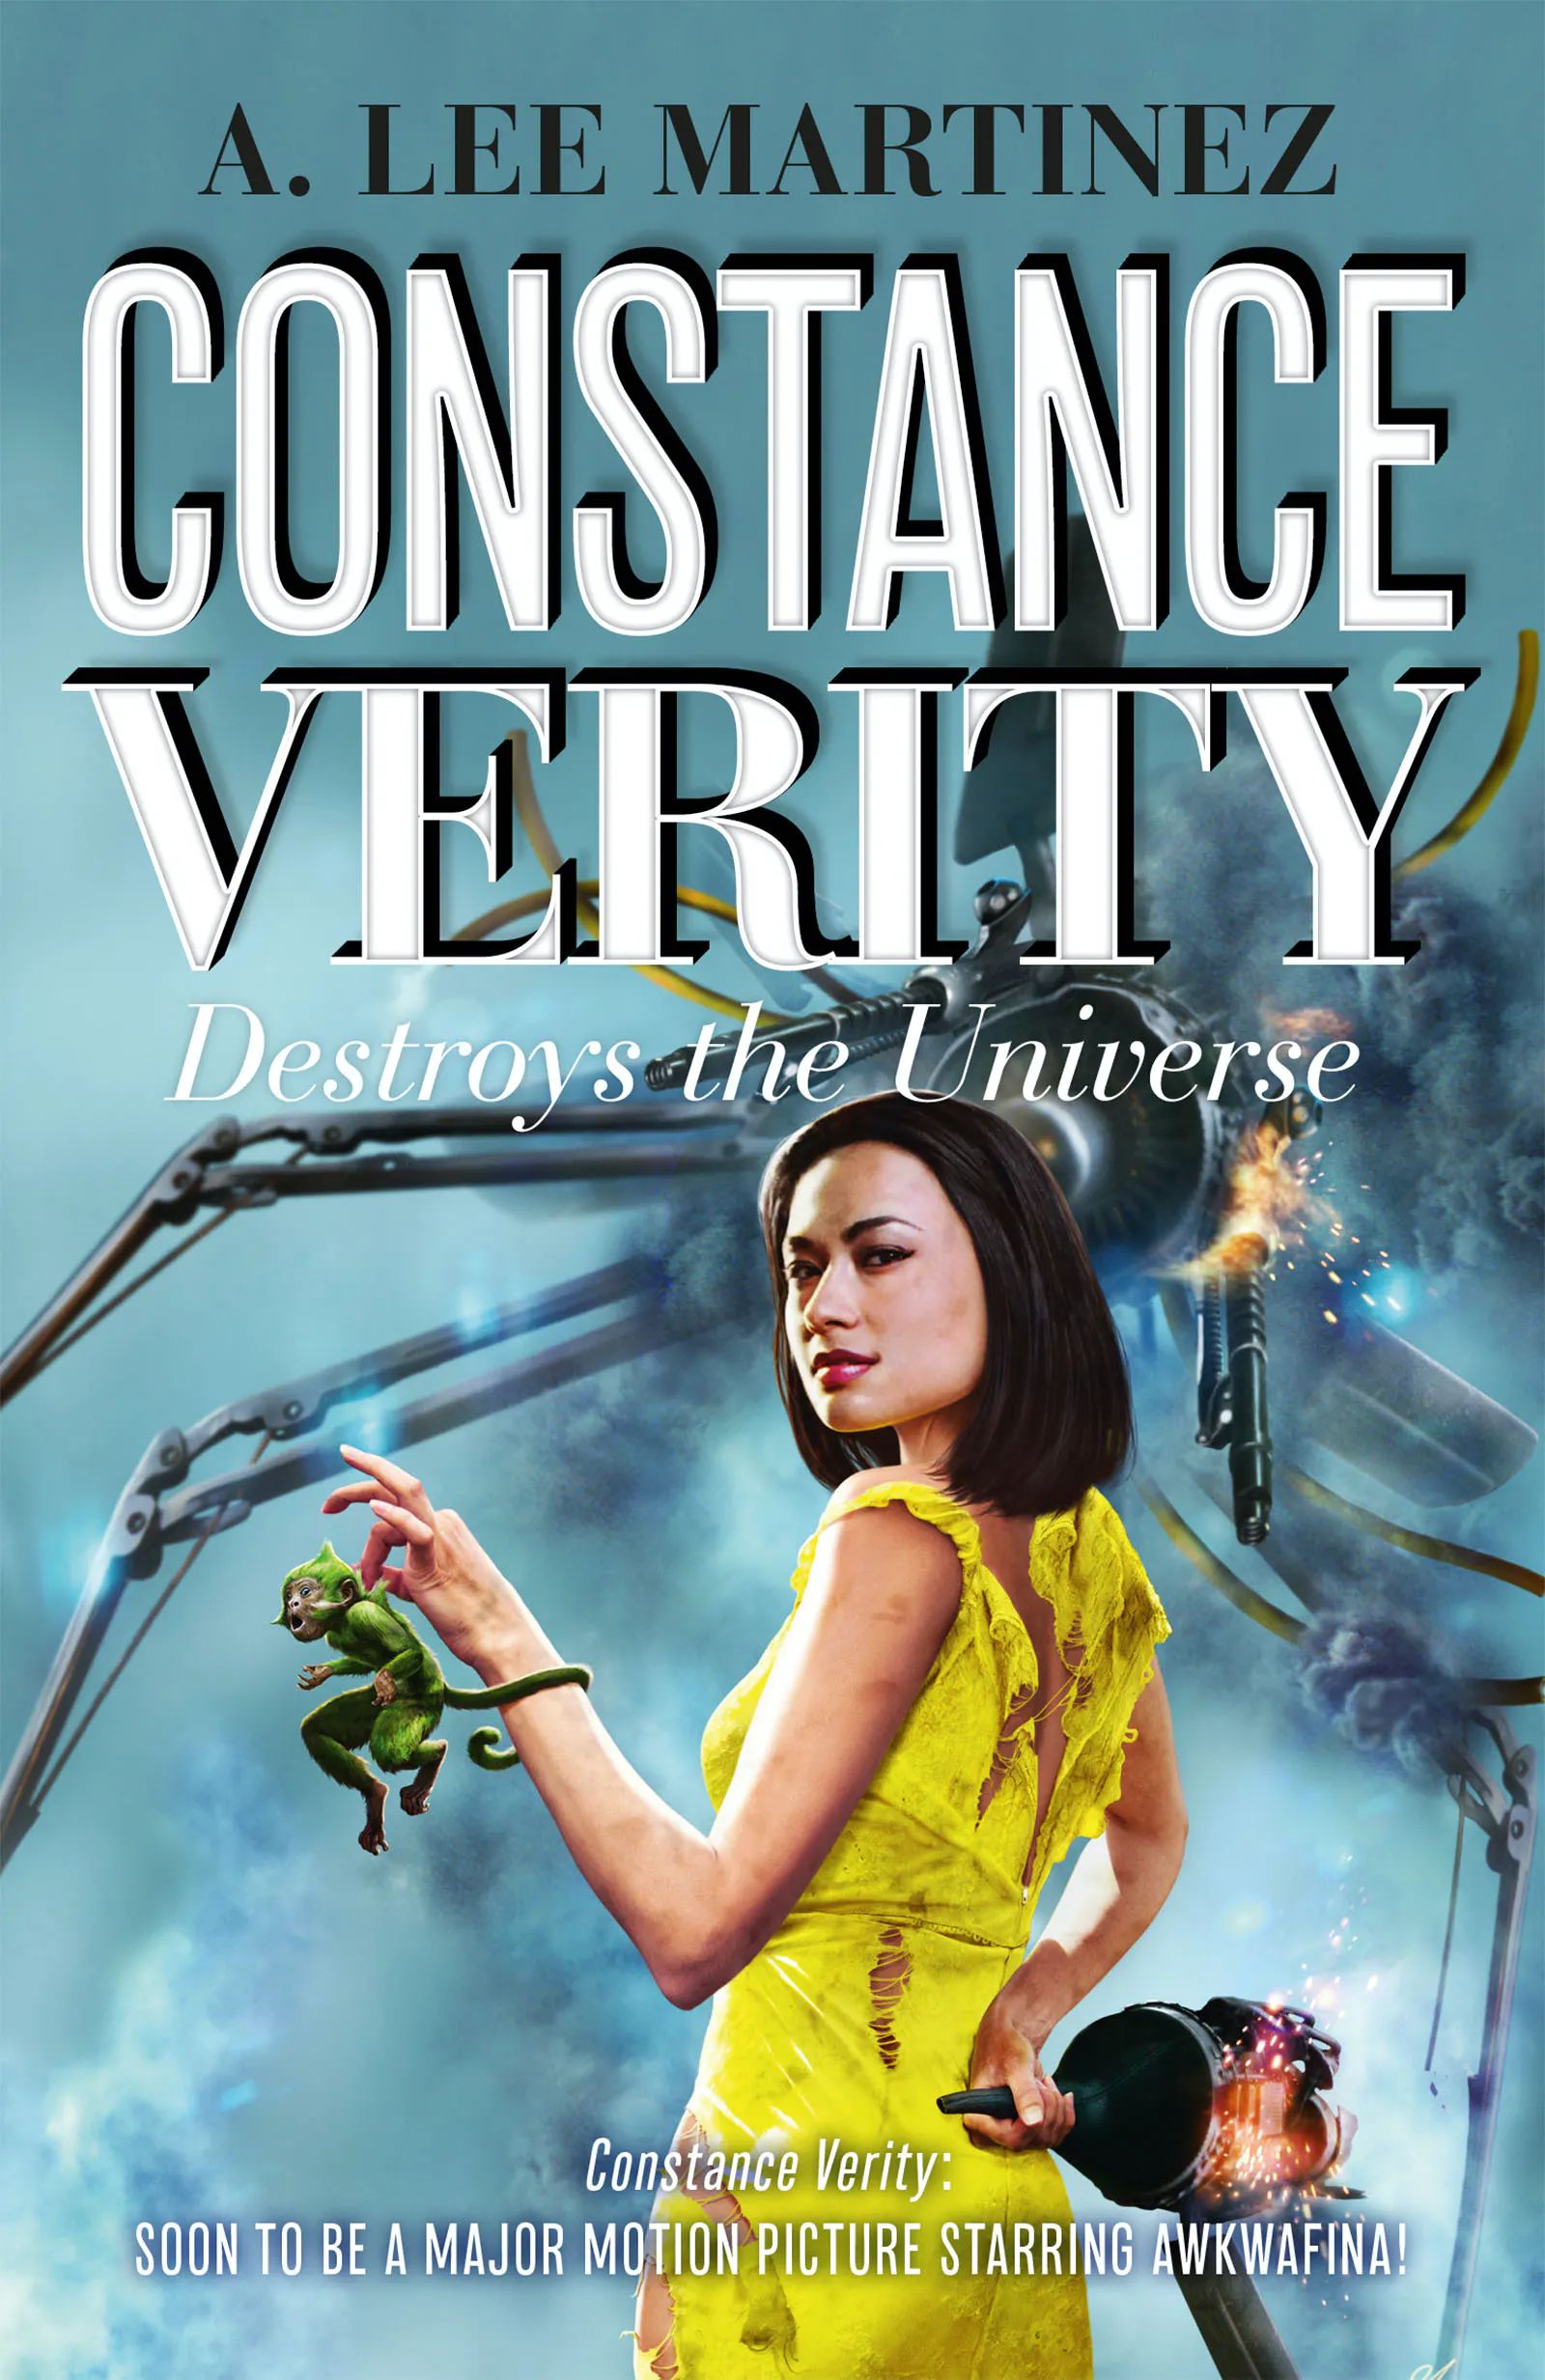 Constance Verity Destroys the Universe : Book 3 in the Constance Verity trilogy; The Last Adventure of Constance Verity will star Awkwafina in the forthcoming Hollywood blockbuster